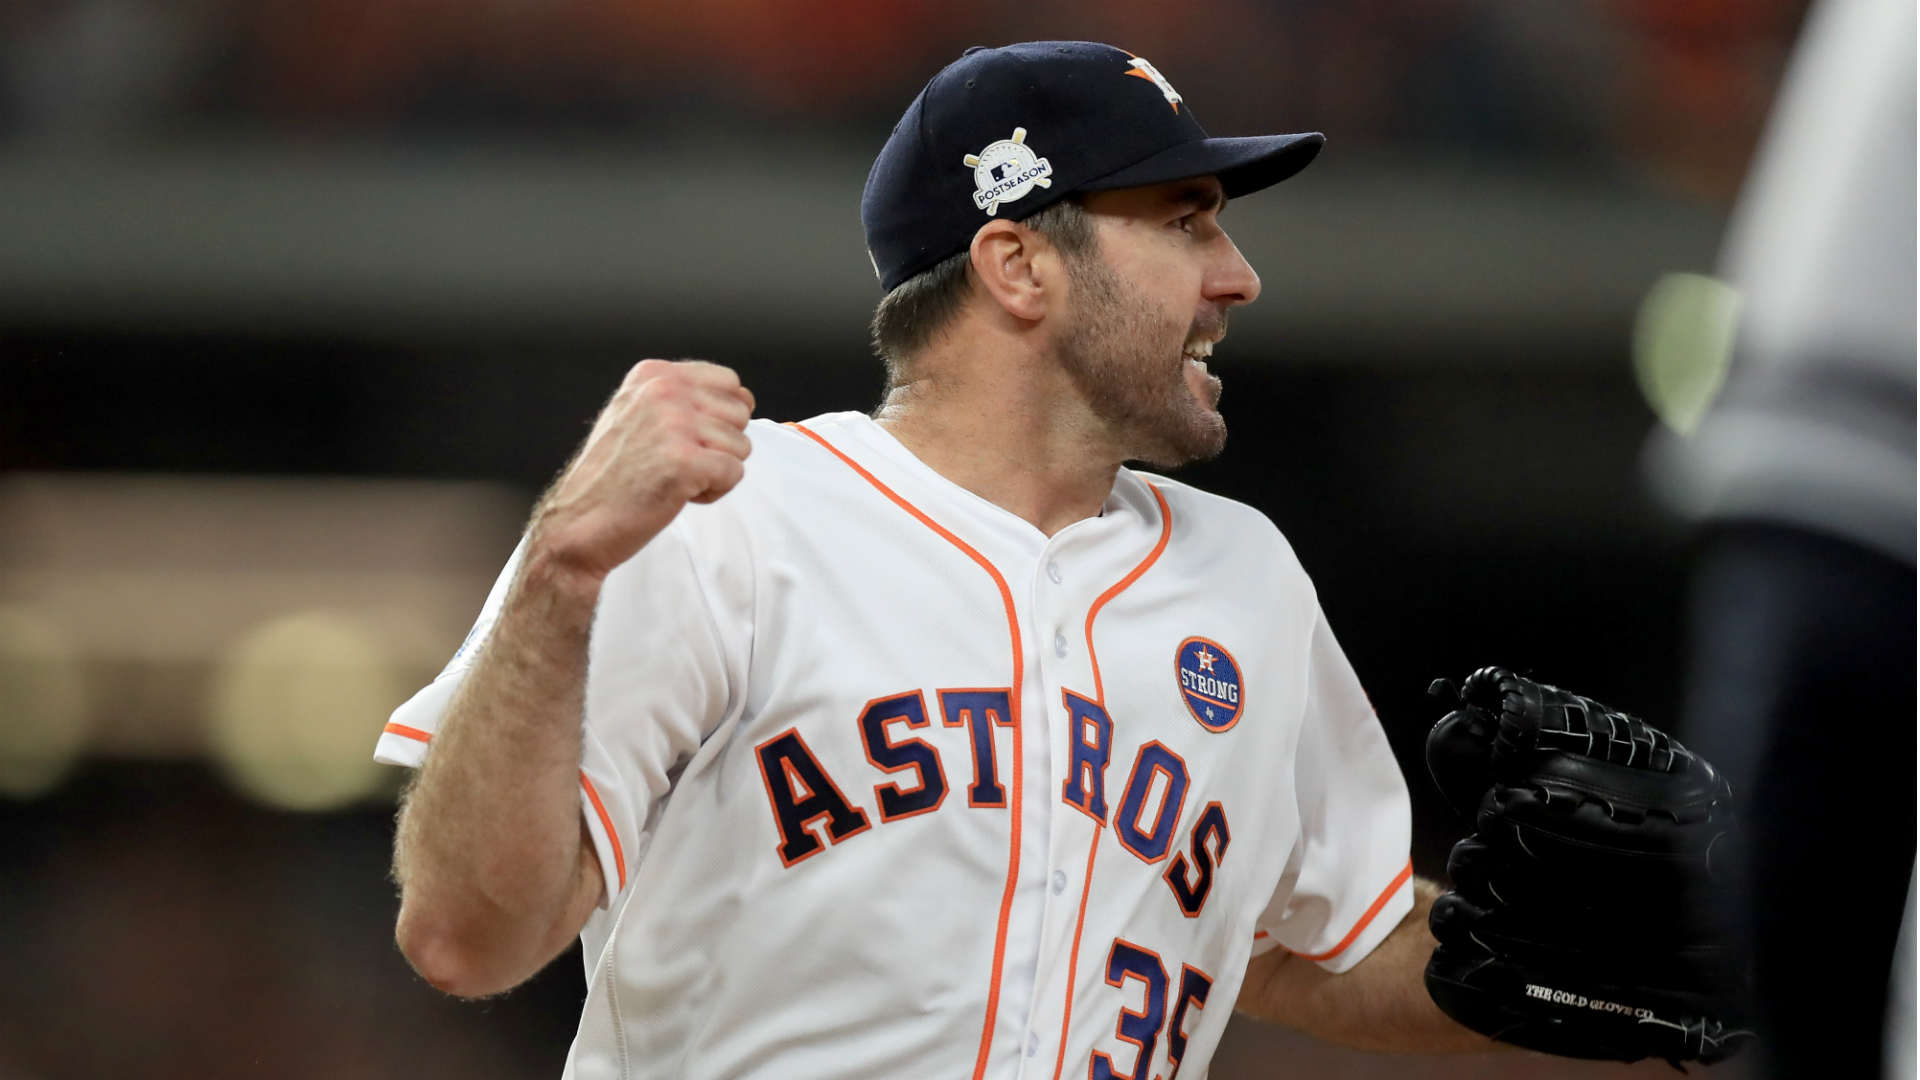 Starter Justin Verlander has posted the best numbers of his career since coming over to the Astros at the waiver trade deadline in 2017.